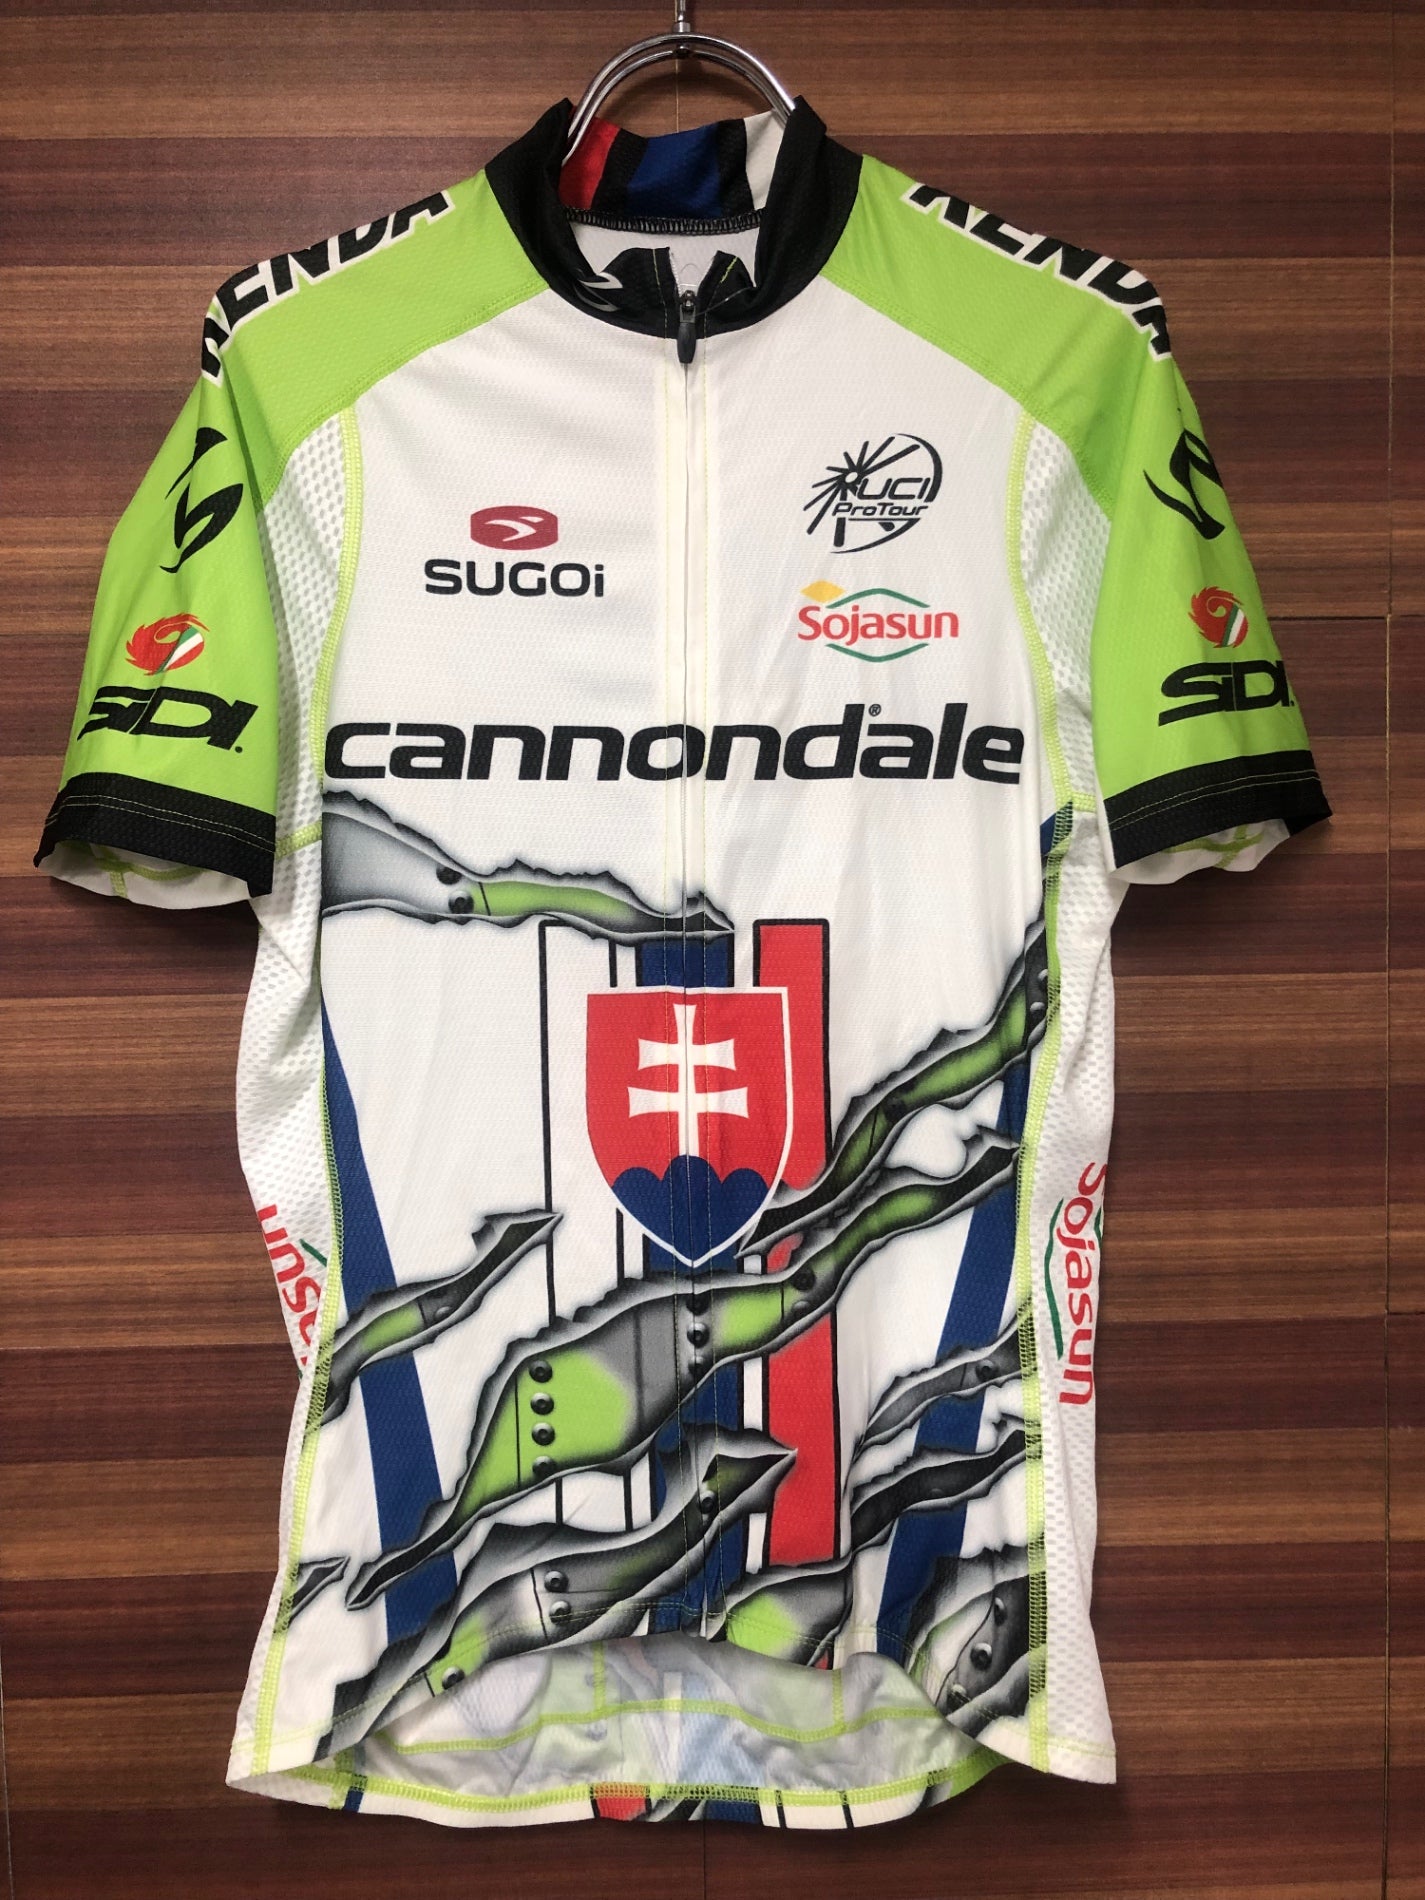 HP285 スゴイ SUGOi 半袖 サイクルジャージ 白 総柄 S cannondale